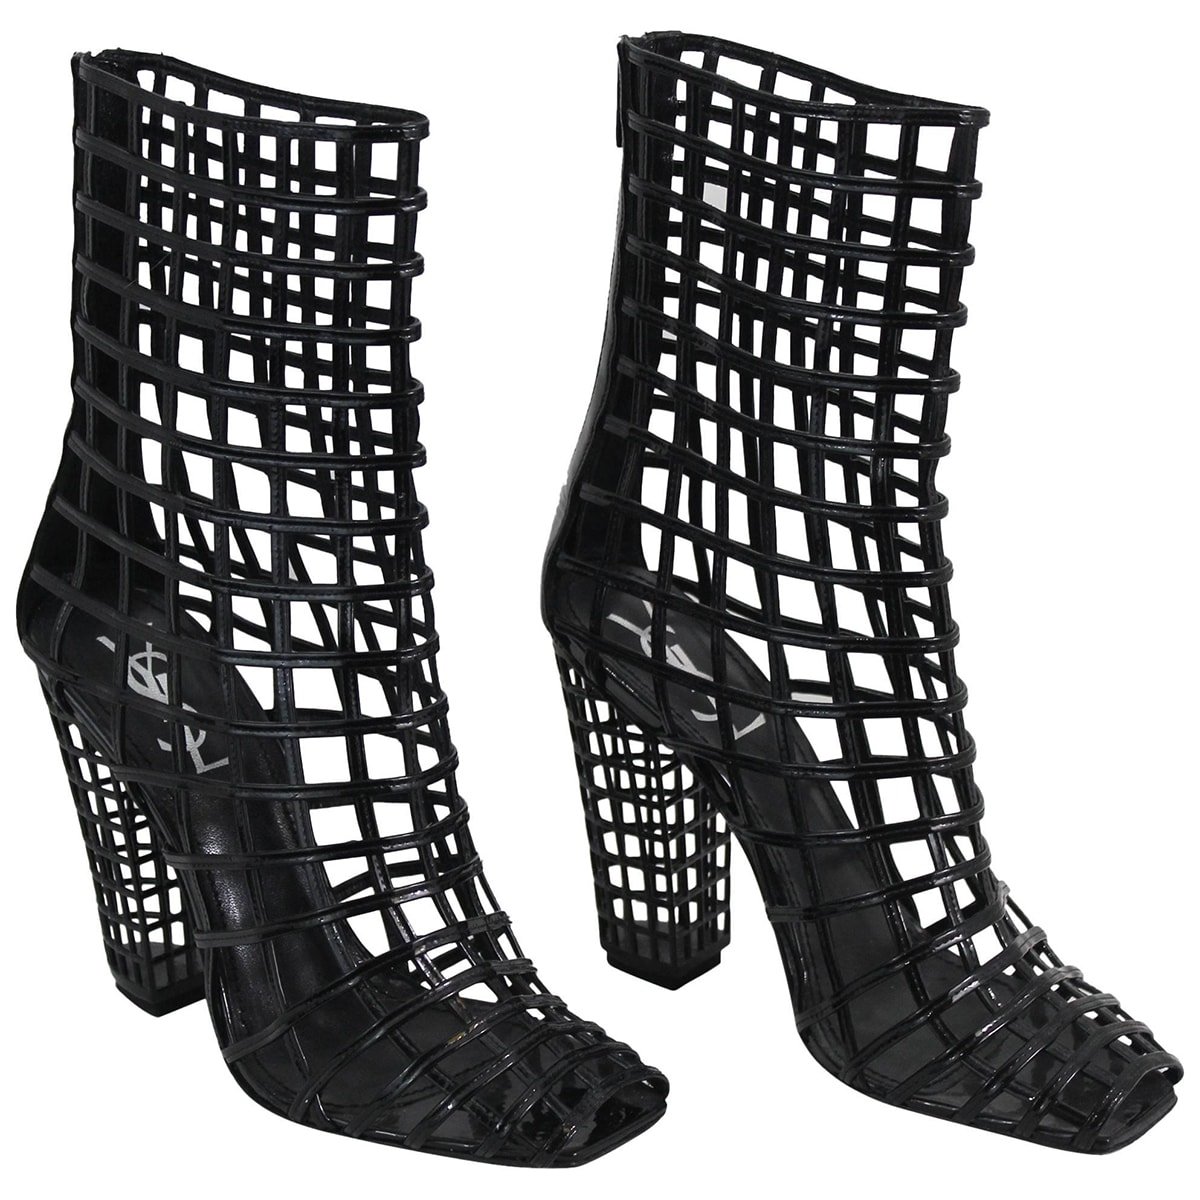 Caged heels are believed to have started by YSL in 2009 with the release of their caged ankle boots